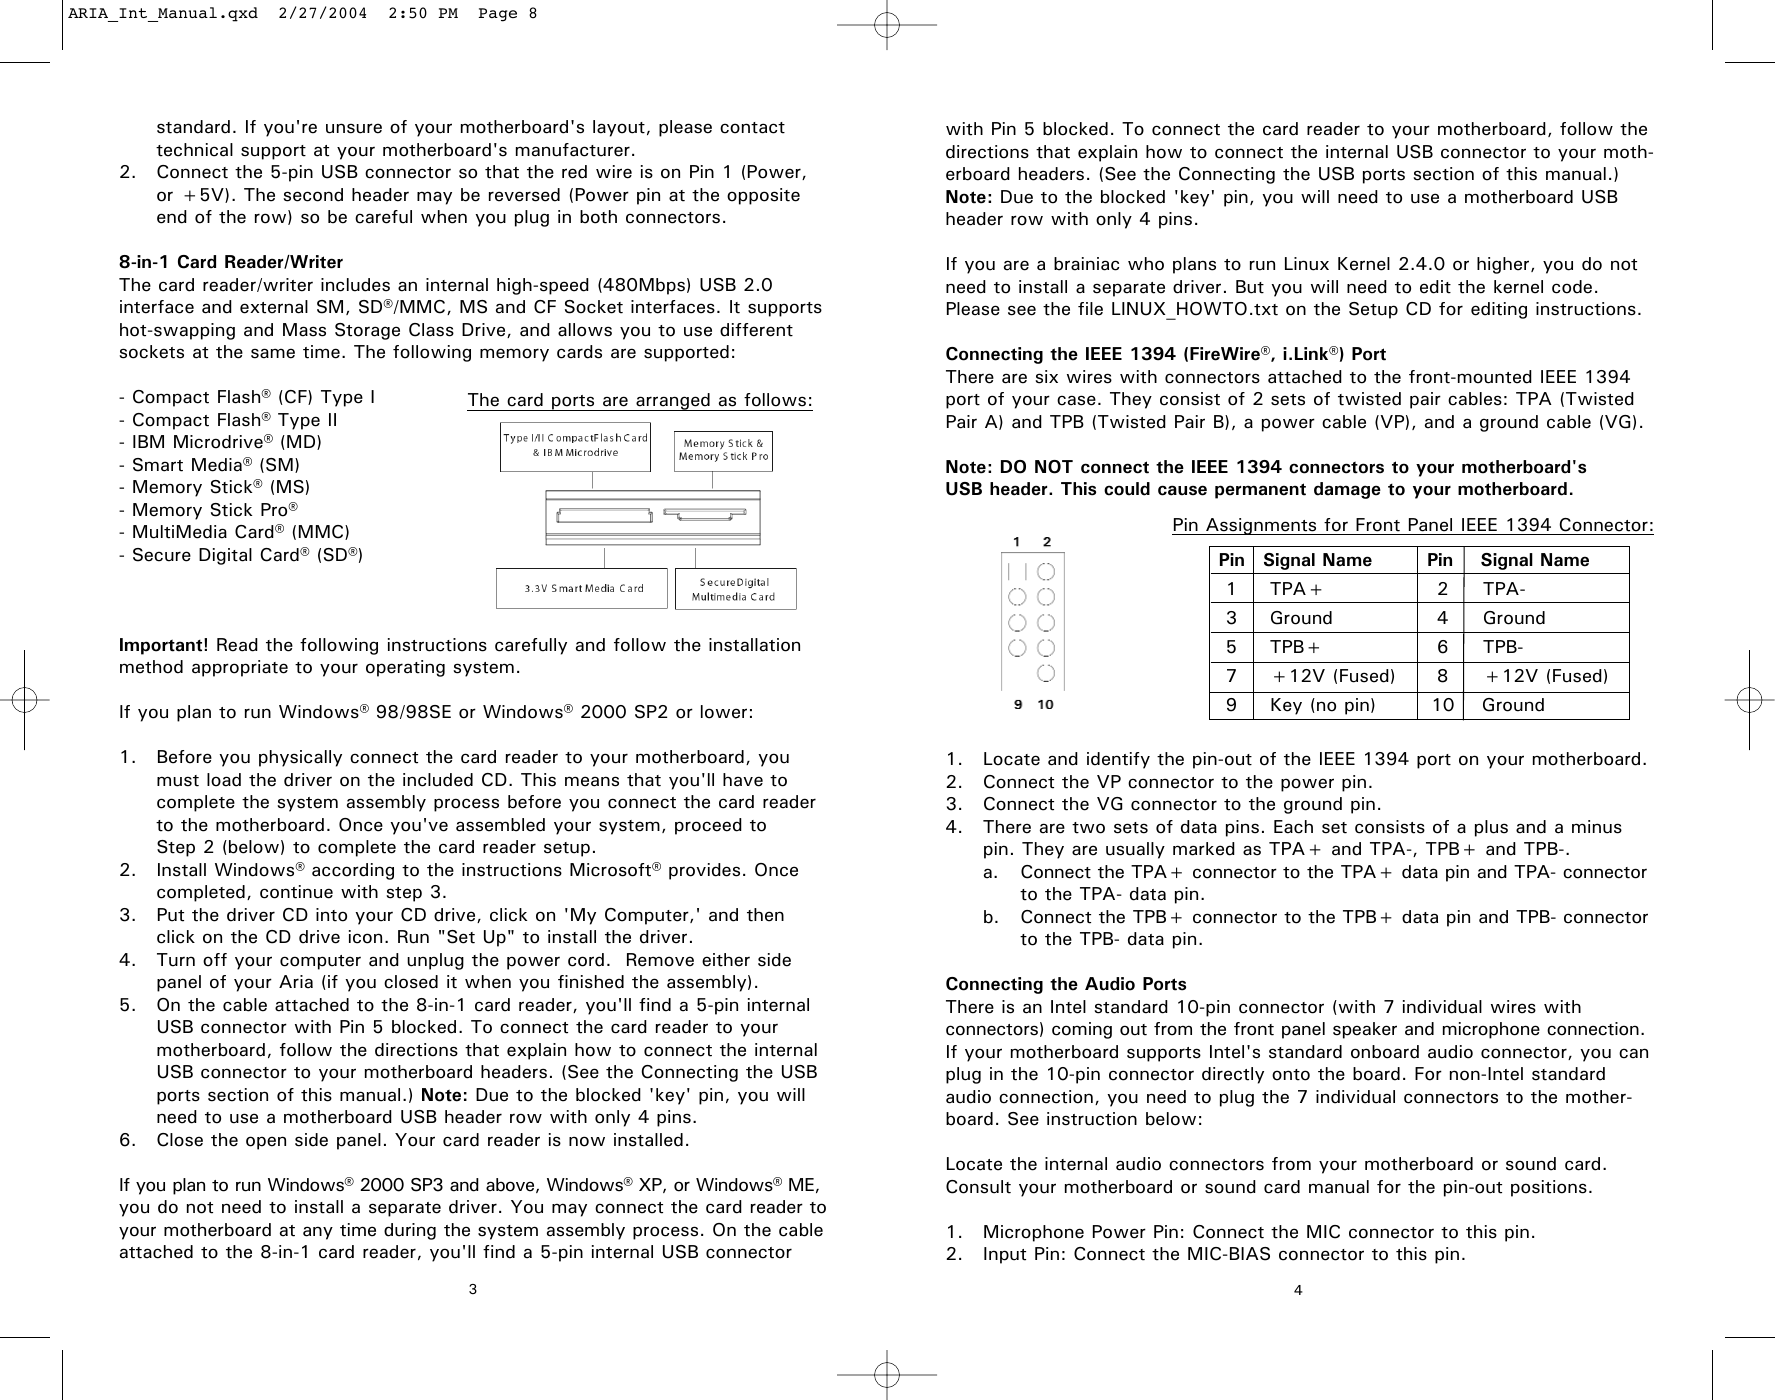 Page 3 of 4 - Antec Antec-Ar300-Users-Manual- ARIA_Int_Manual  Antec-ar300-users-manual